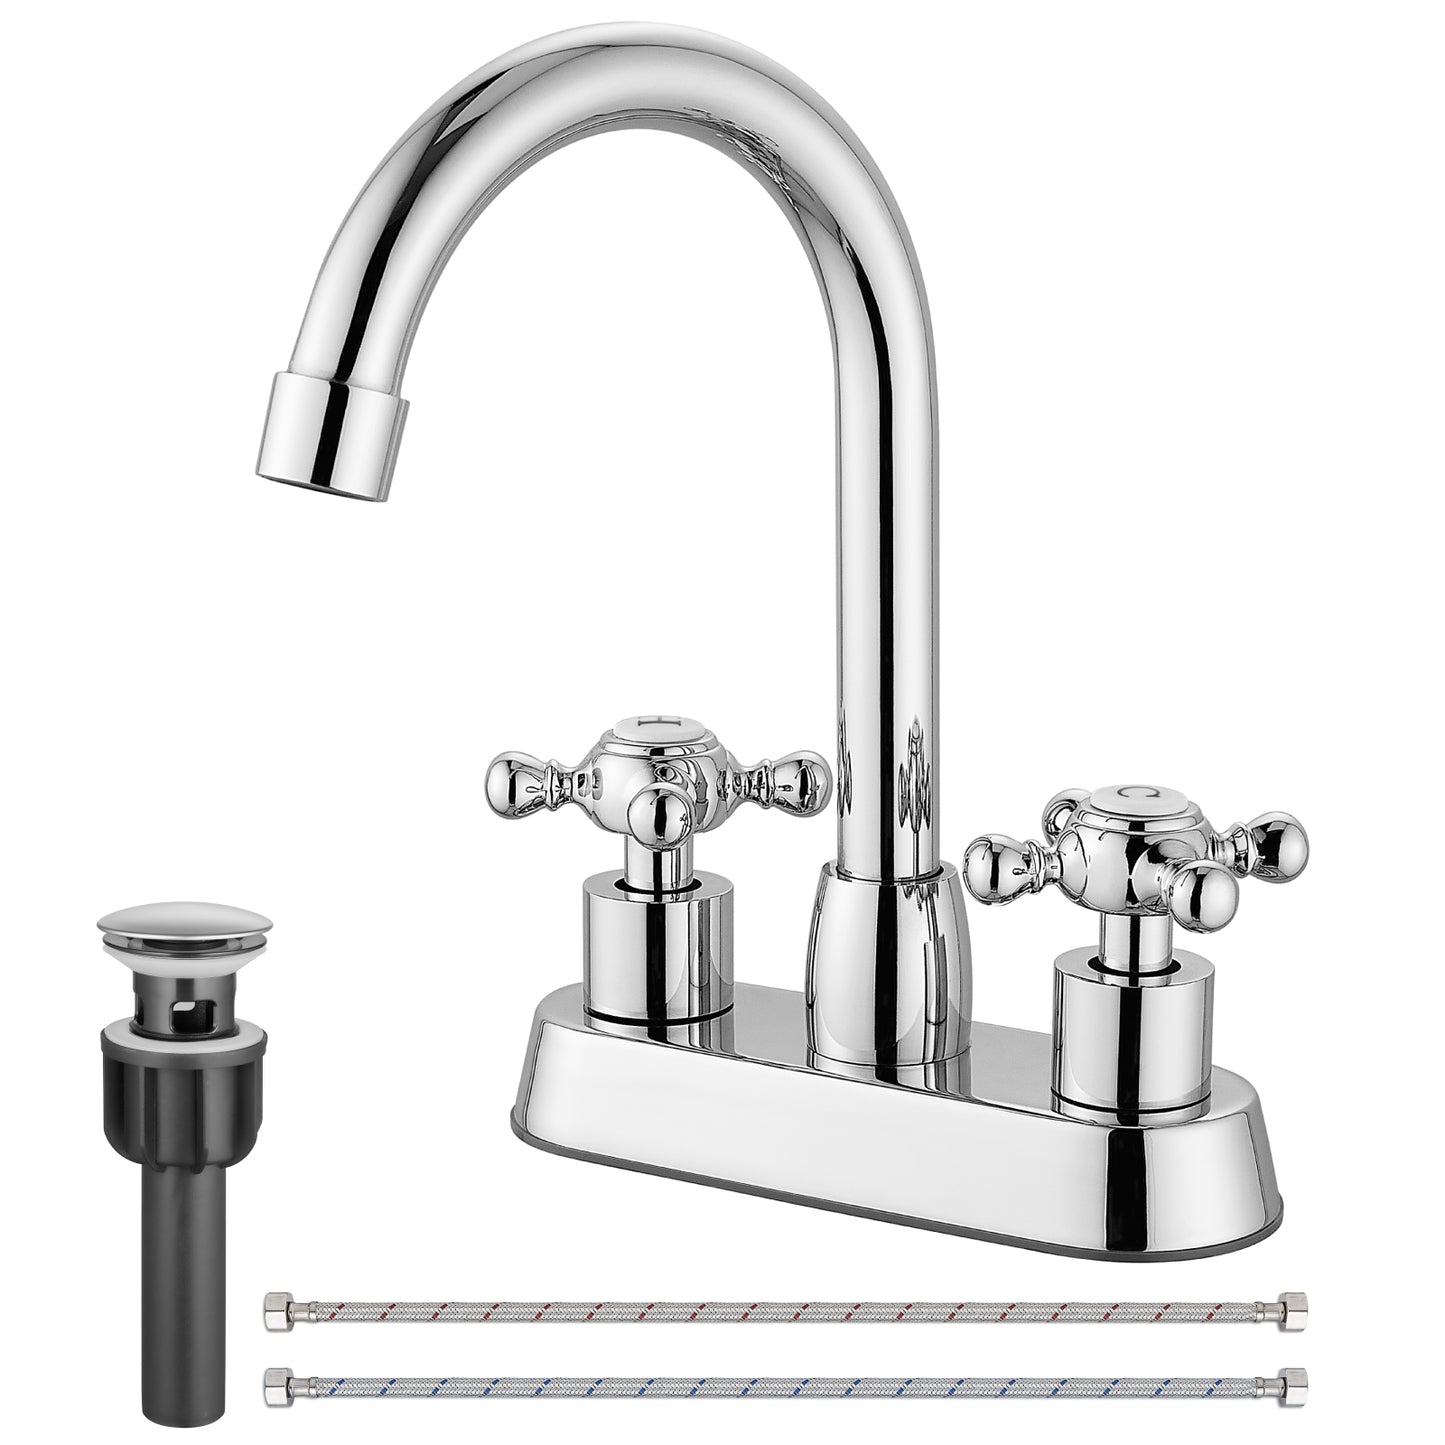 
                  
                    Cinwiny 4 inch Centerset Bathroom Sink Faucet Double Cross Handle with Pop-Up Drain,Deck Mount Modern Bathroom Vanity Lavatory Faucet with 360 Degree Rotation Spout Water Supply Hoses
                  
                